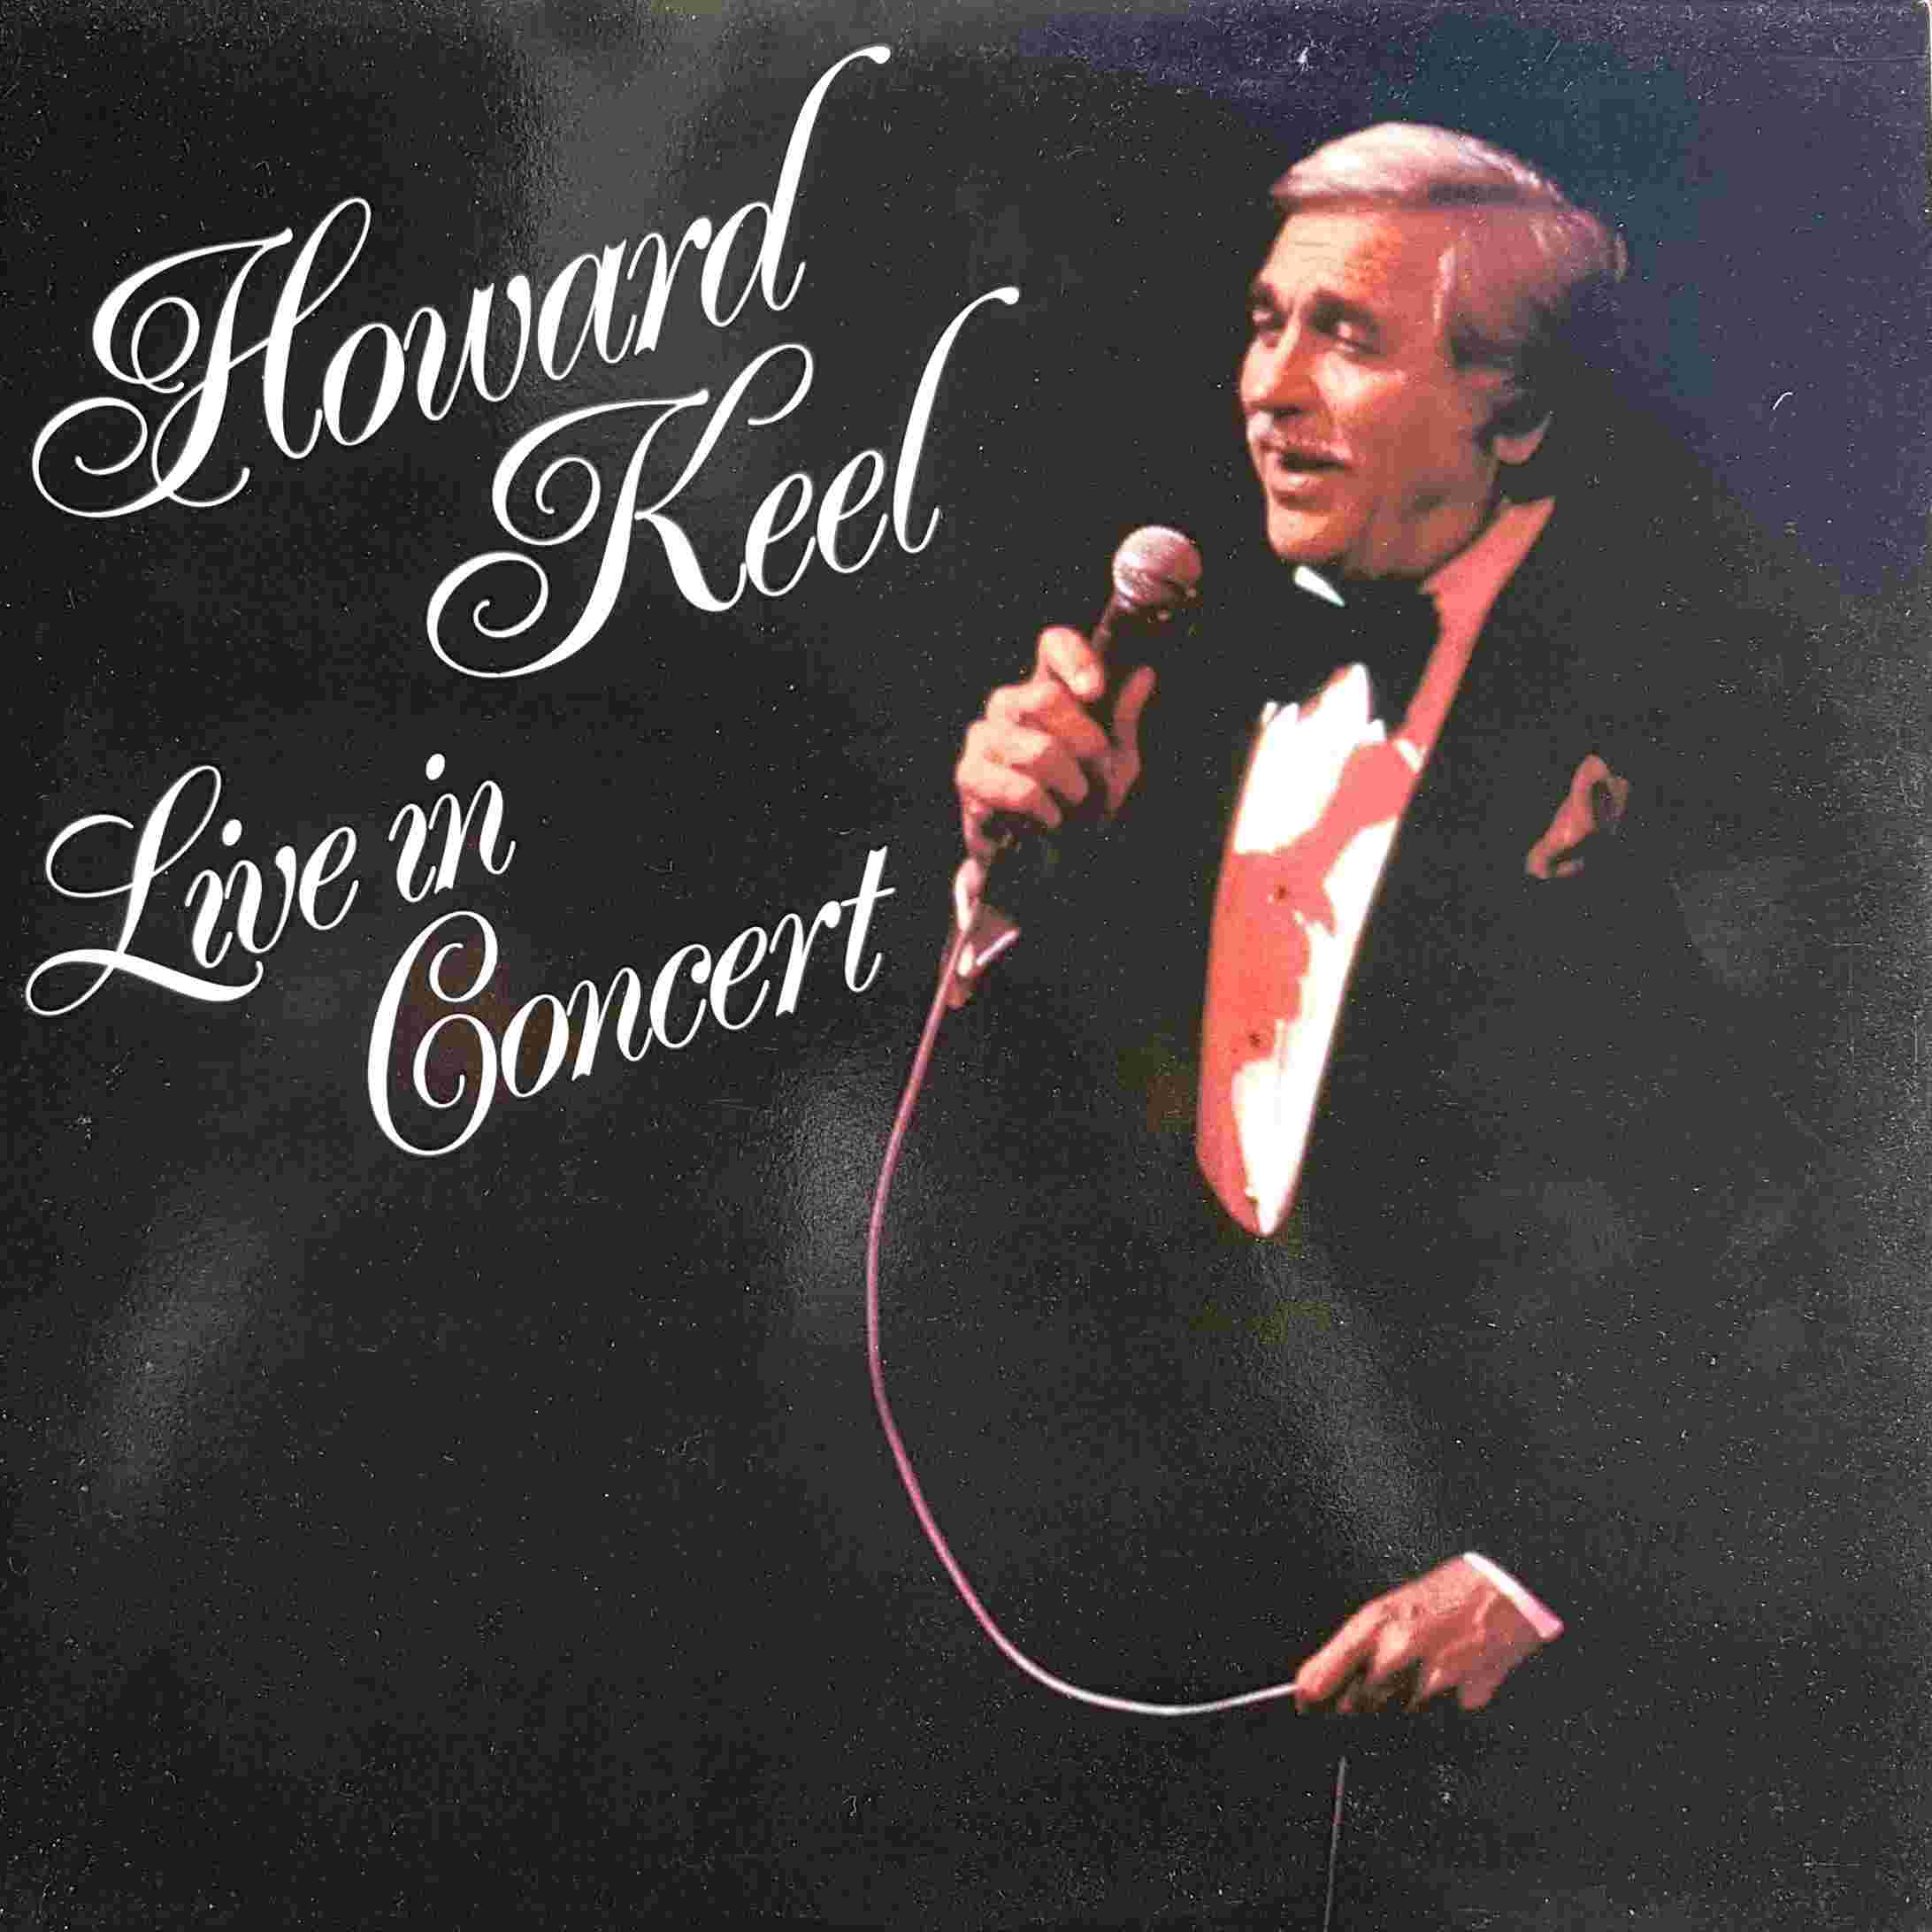 Picture of REQ 744 Howard Keel - live in concert by artist Howard Keel from the BBC albums - Records and Tapes library